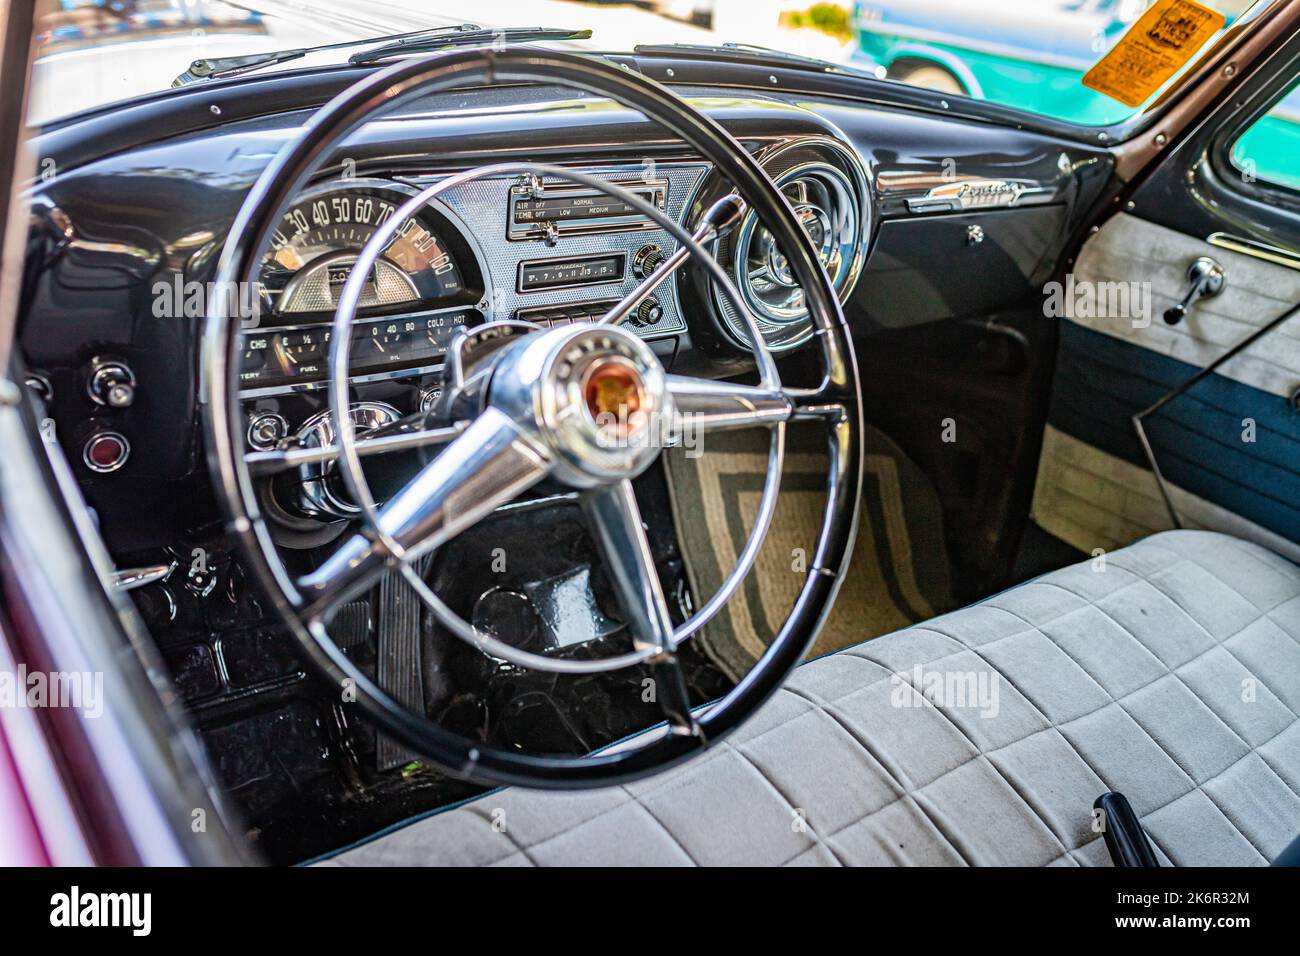 Falcon Heights, MN - June 19, 2022: Close up detail interior view of a 1953 Pontiac Chieftain 2 Door Sedan at a local car show. Stock Photo